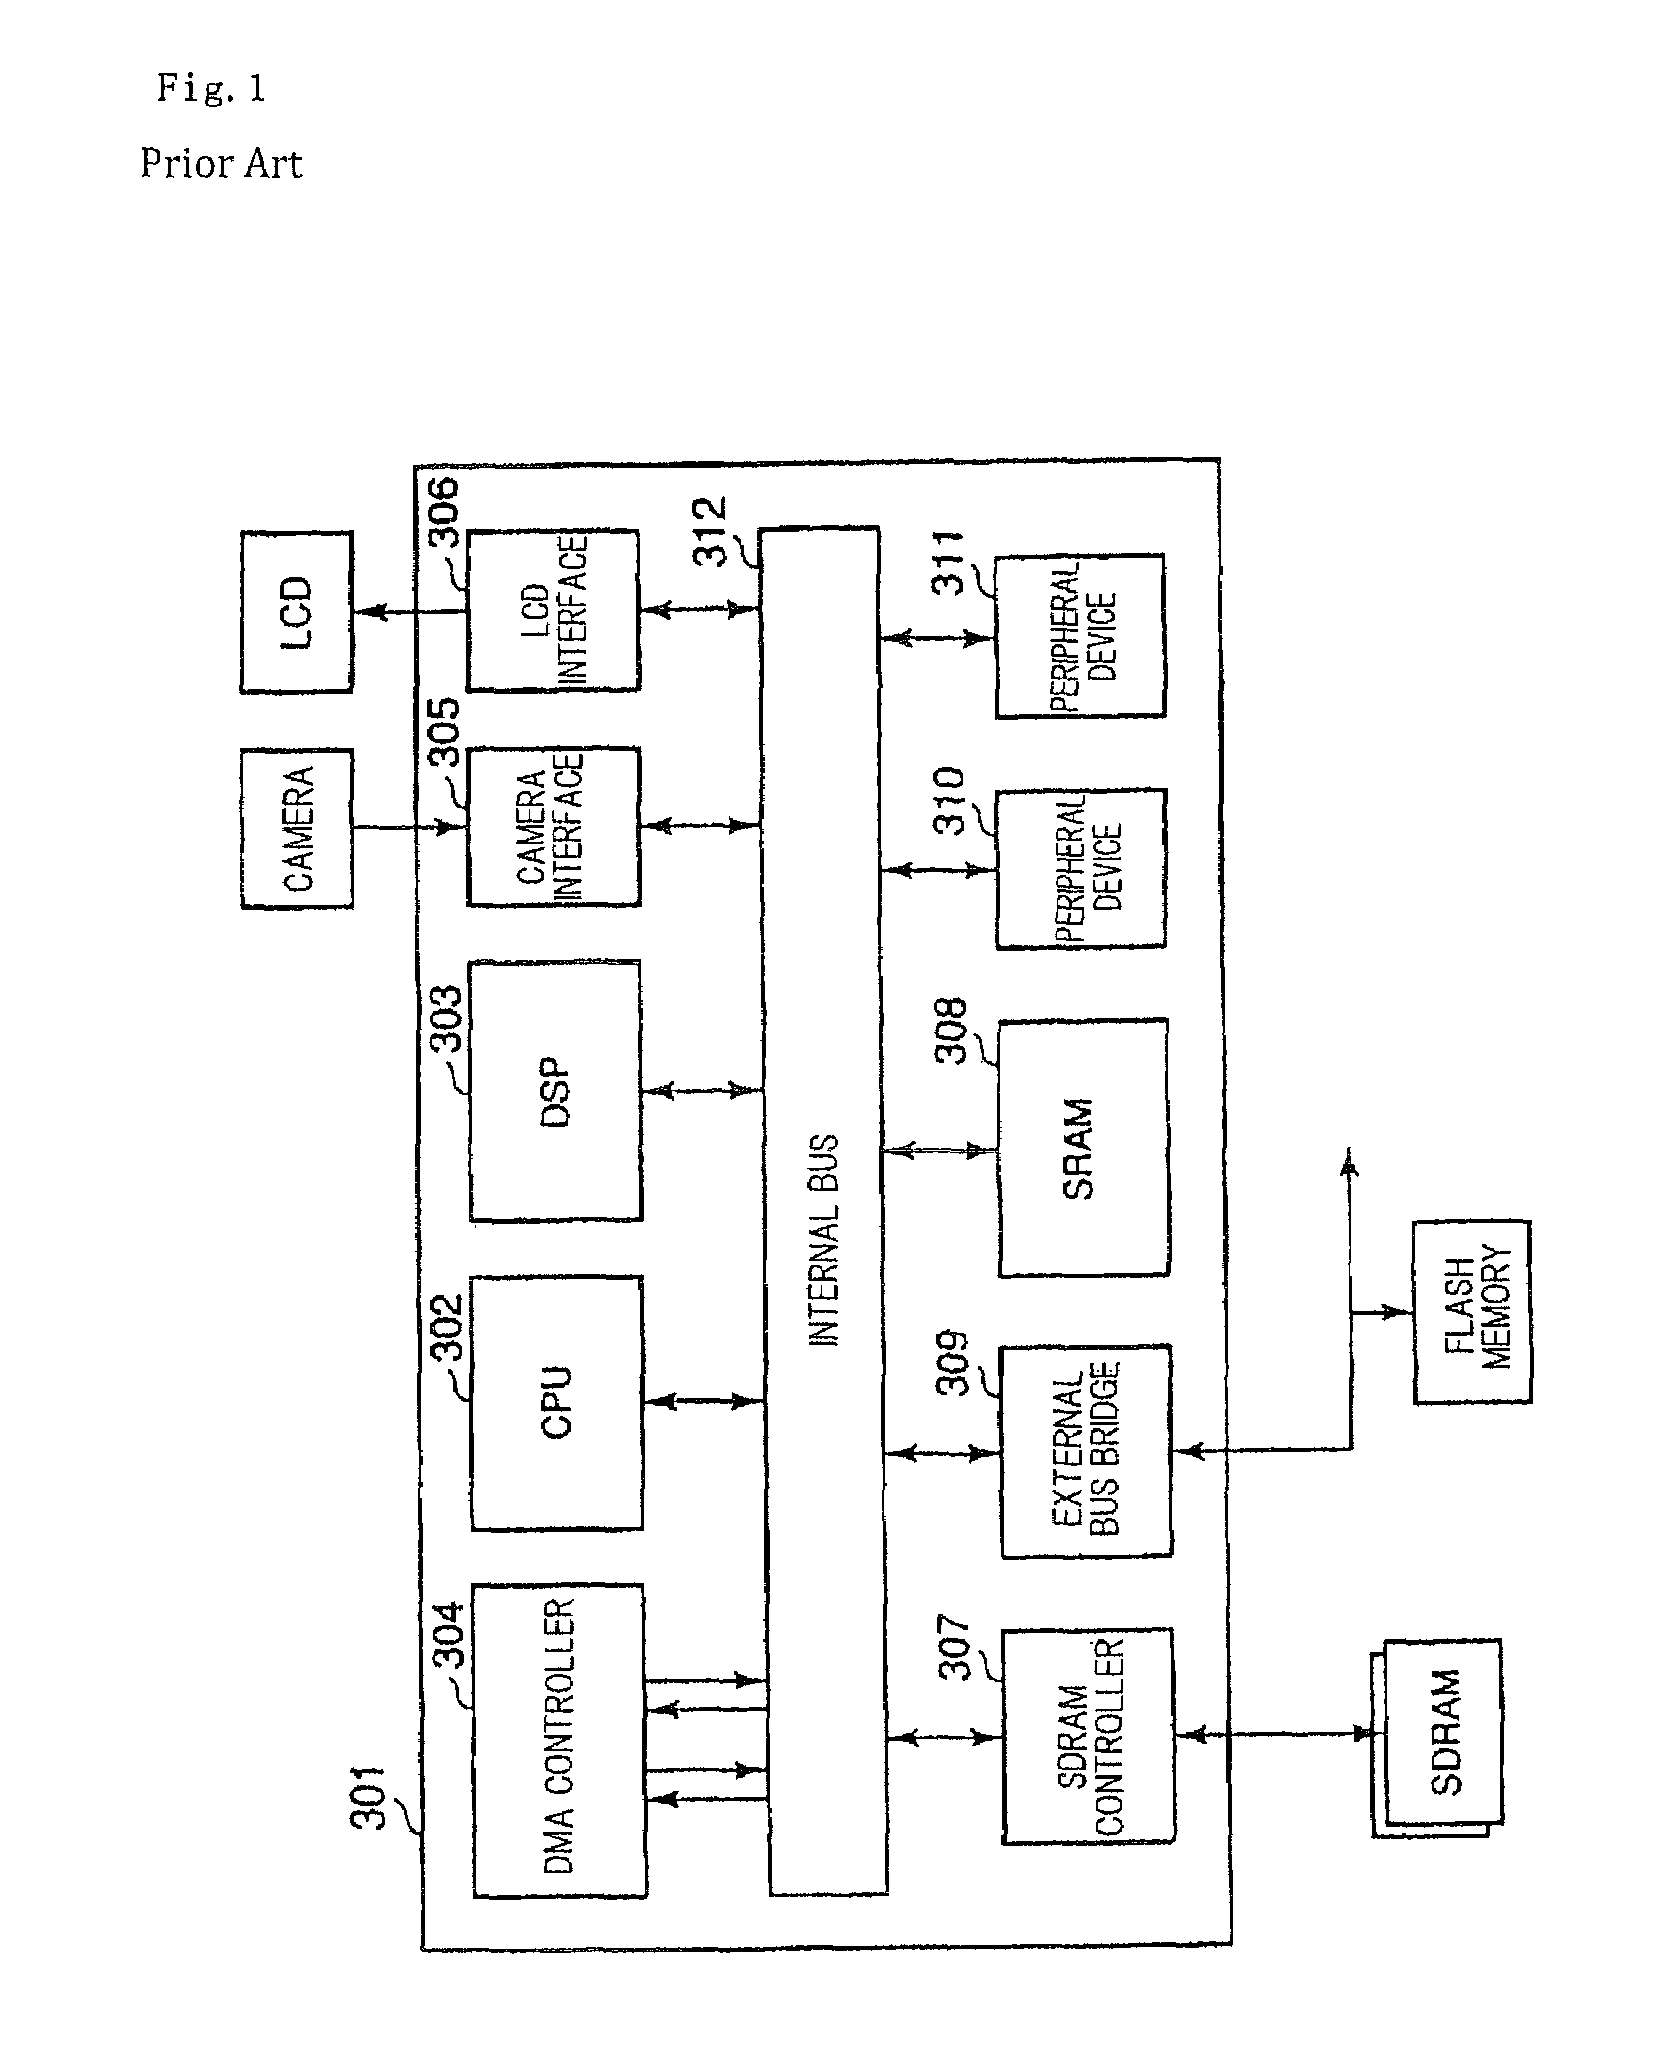 Information processing apparatus having multiple processing units sharing multiple resources